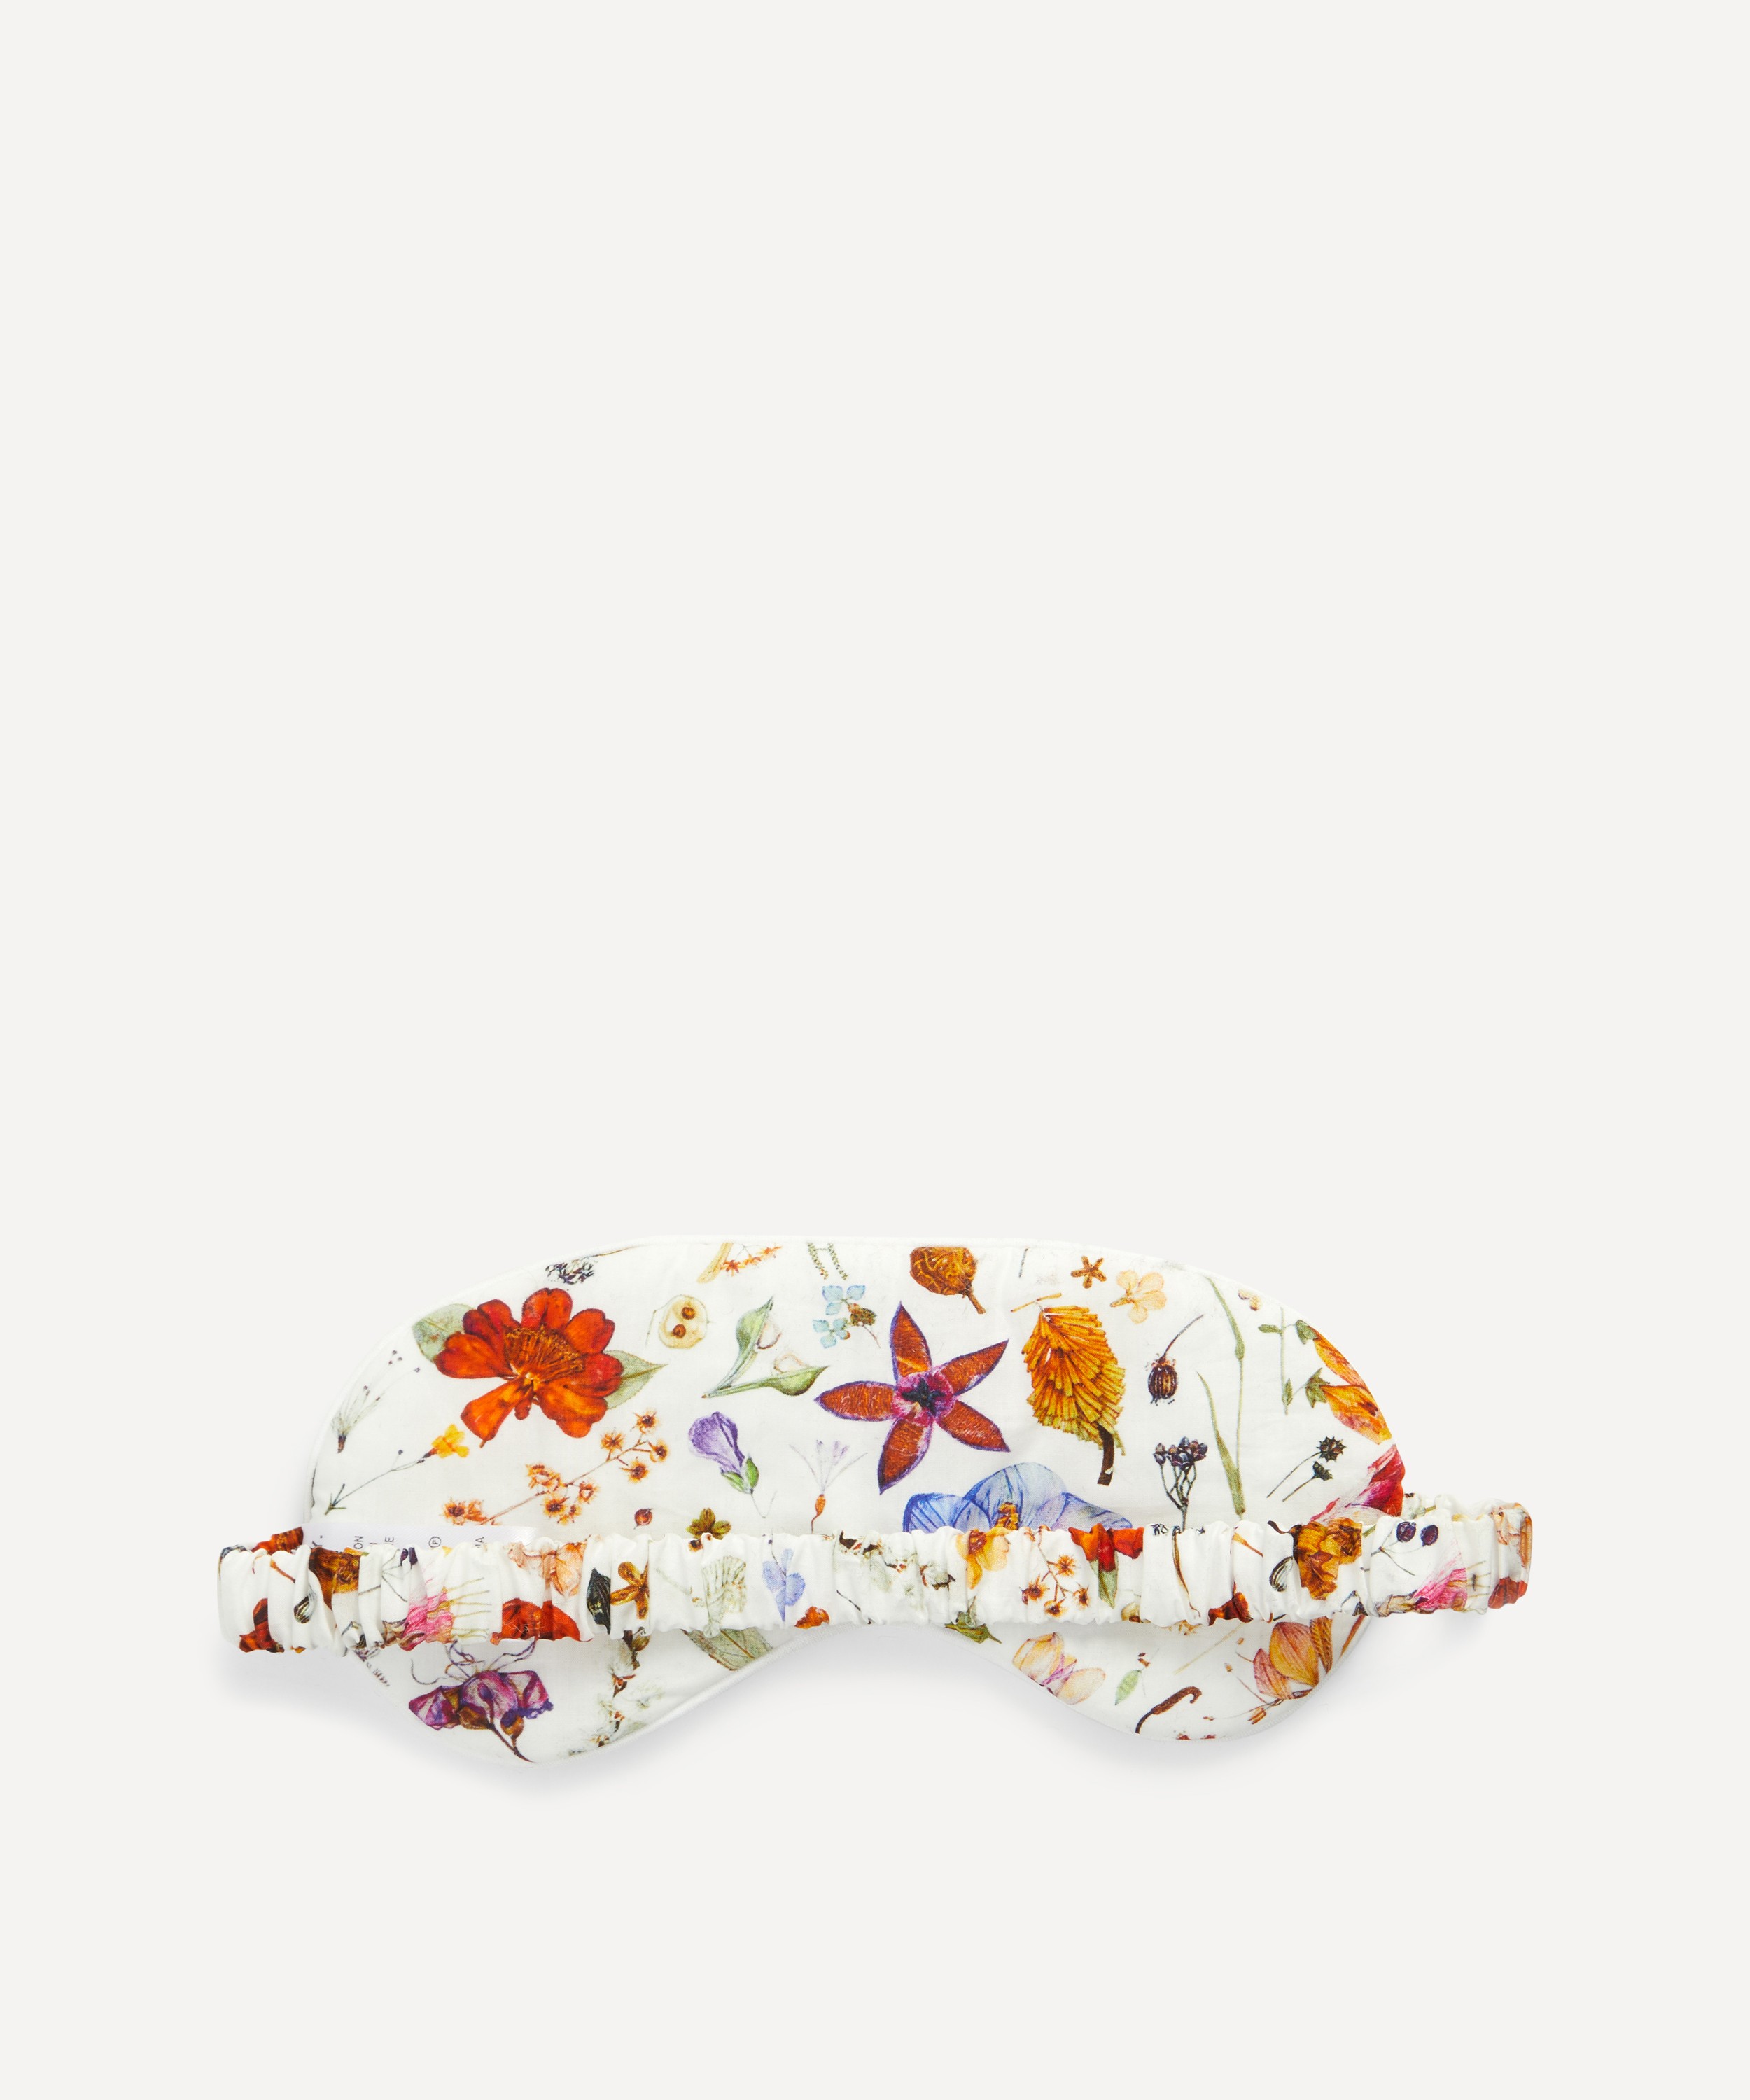 Liberty - Floral Eve Tana Lawn™ Cotton Eye Mask image number 1